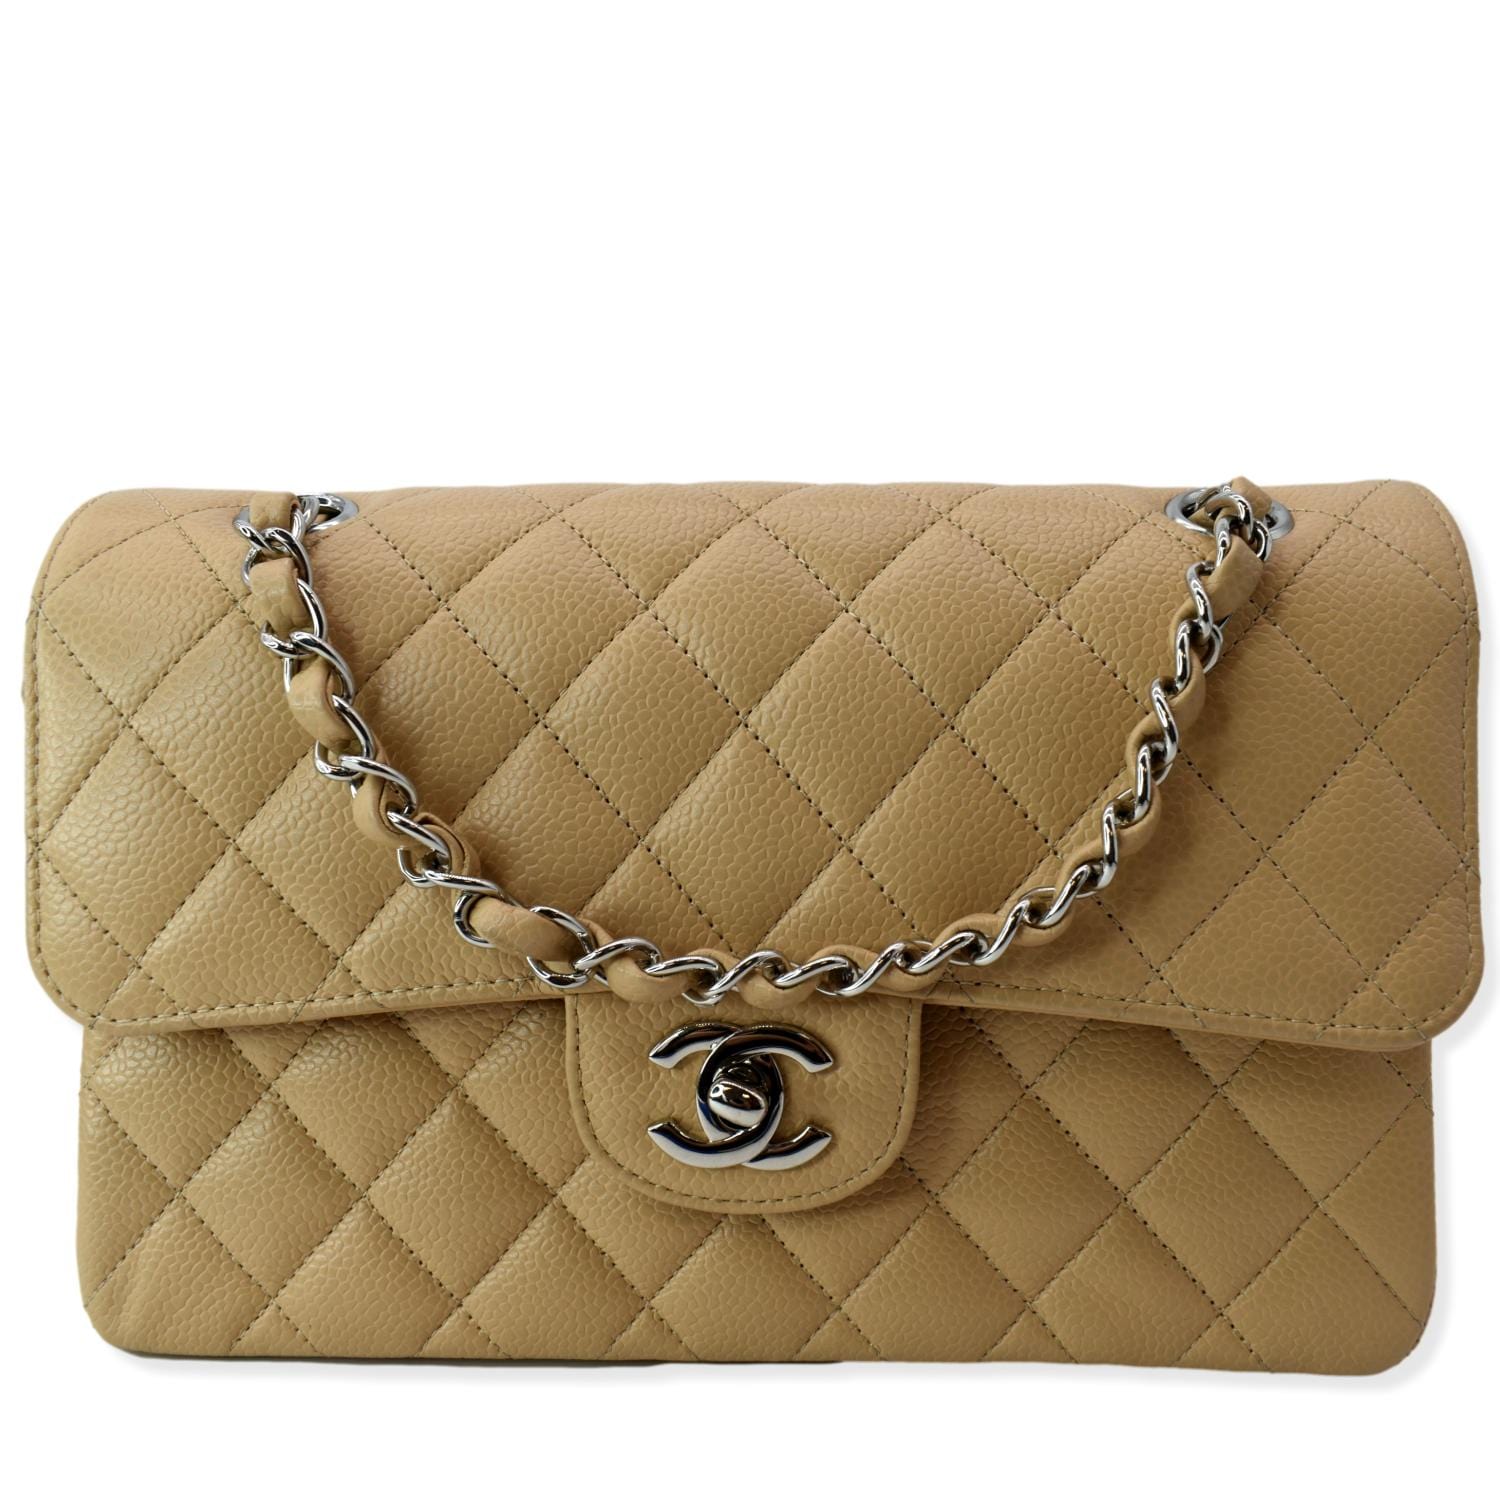 Timeless/classique leather crossbody bag Chanel Camel in Leather - 24332412